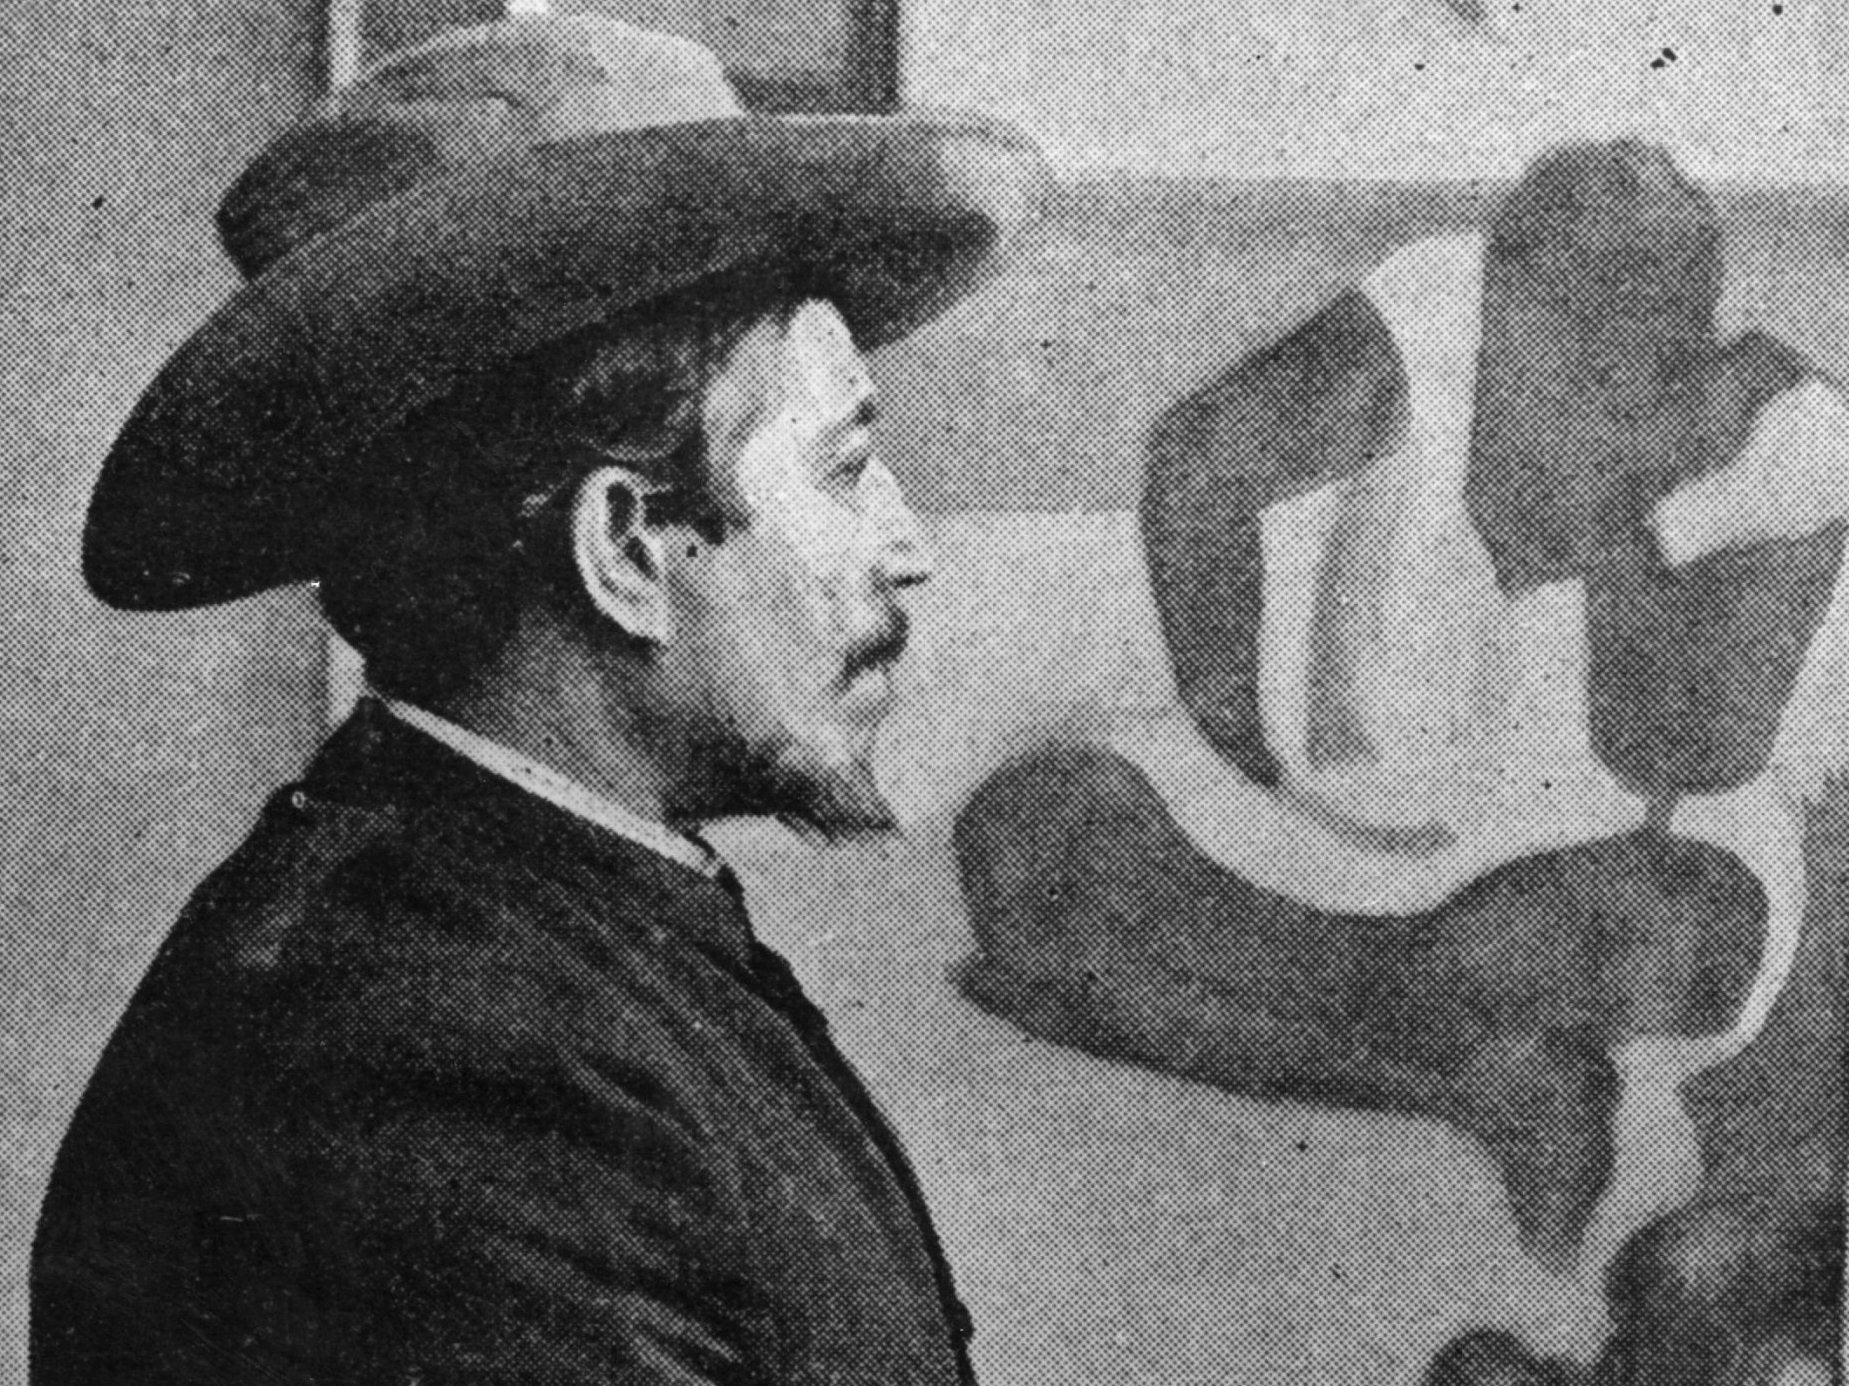 French painter Paul Gauguin (1848-1903) seated in front of one of his paintings